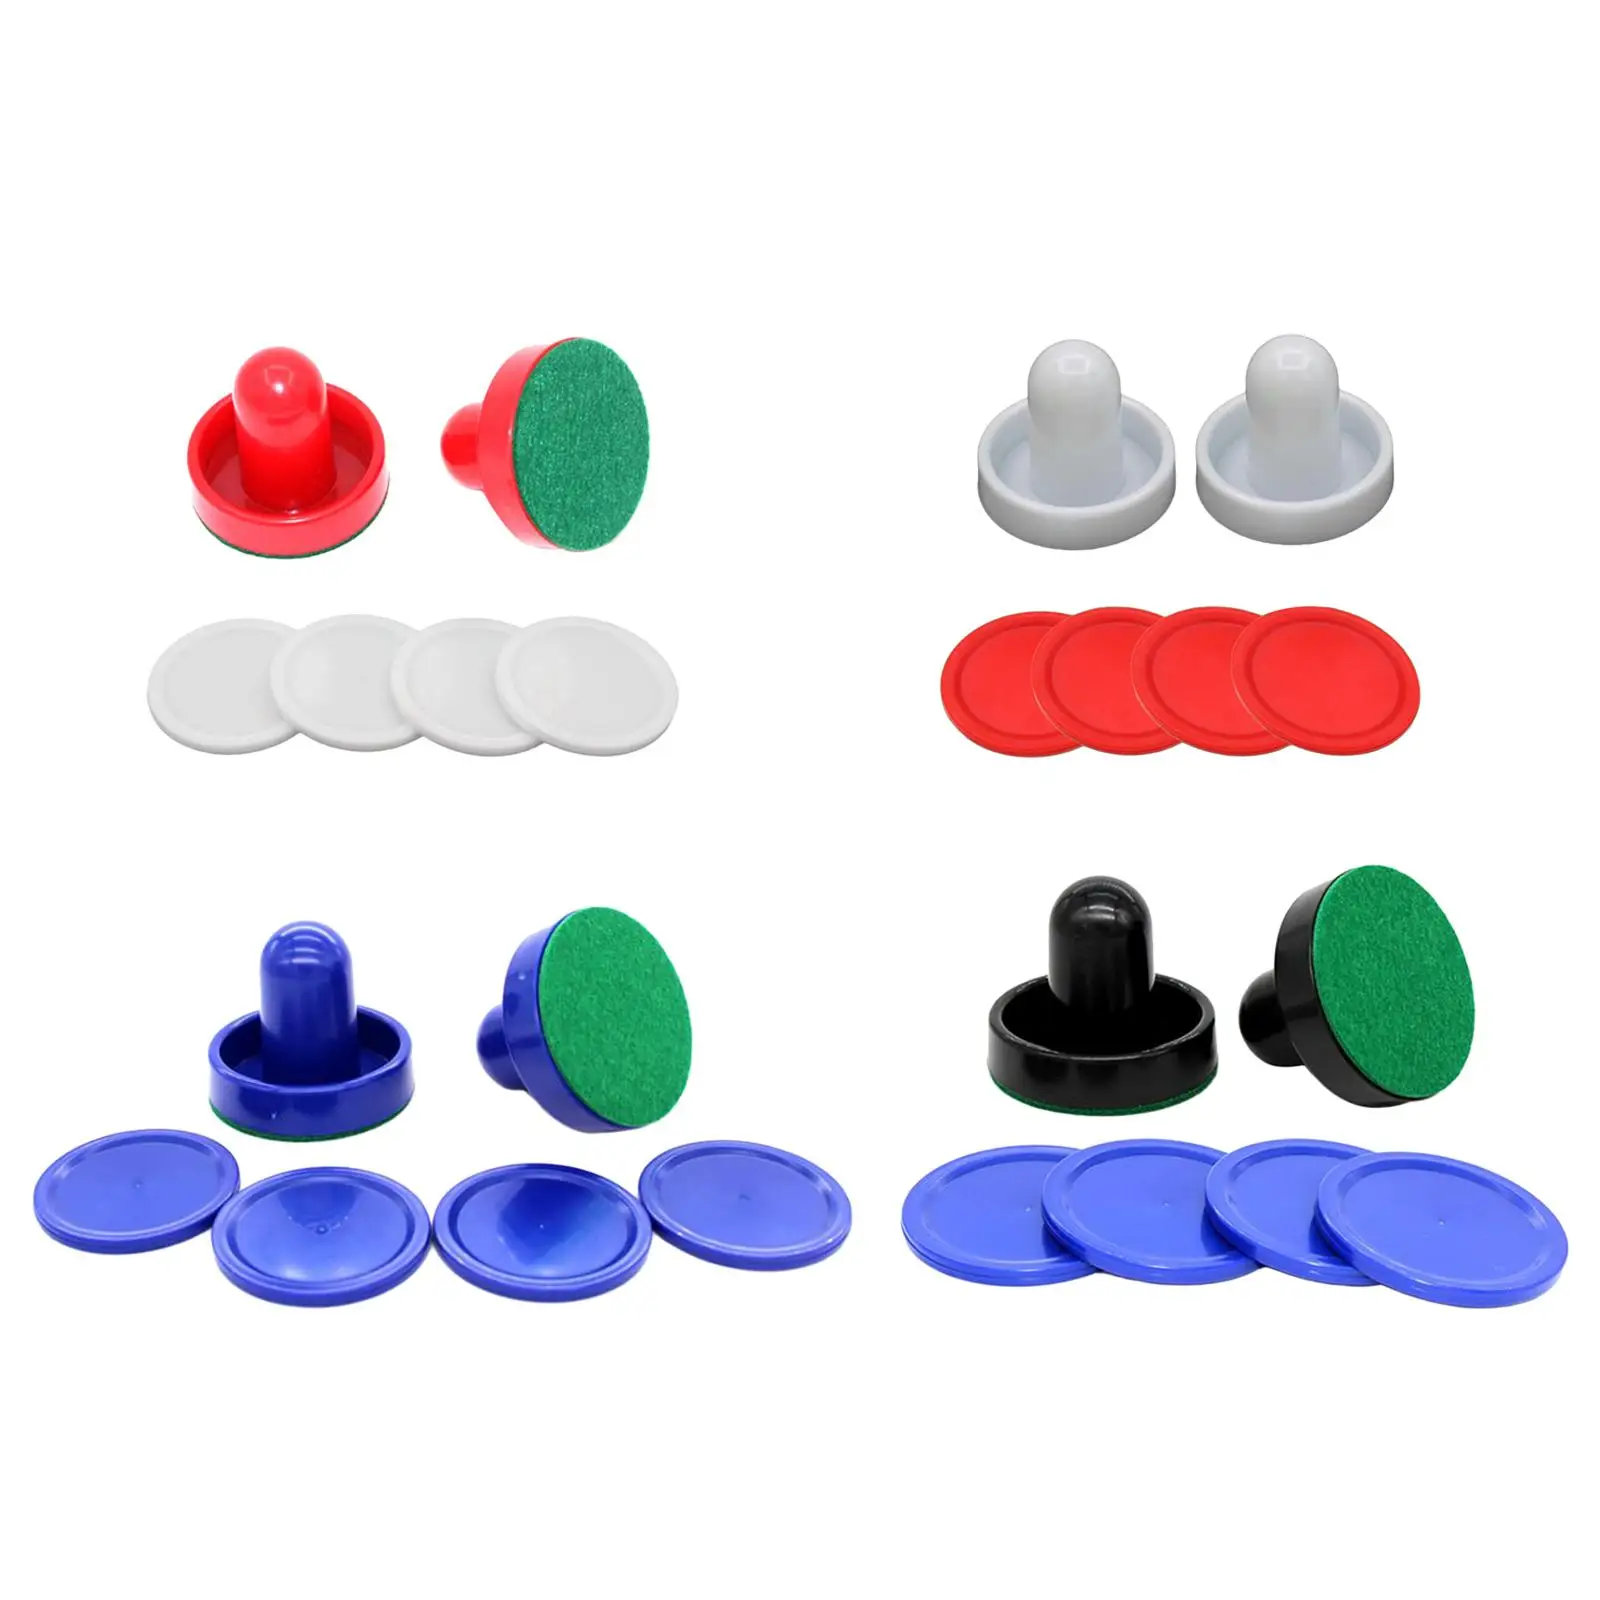 

Air Hockey Pushers and Air Hockey Pucks Entertainment Gift Small Size Replacement Felt Air Hockey Paddles Goal Handles Pushers